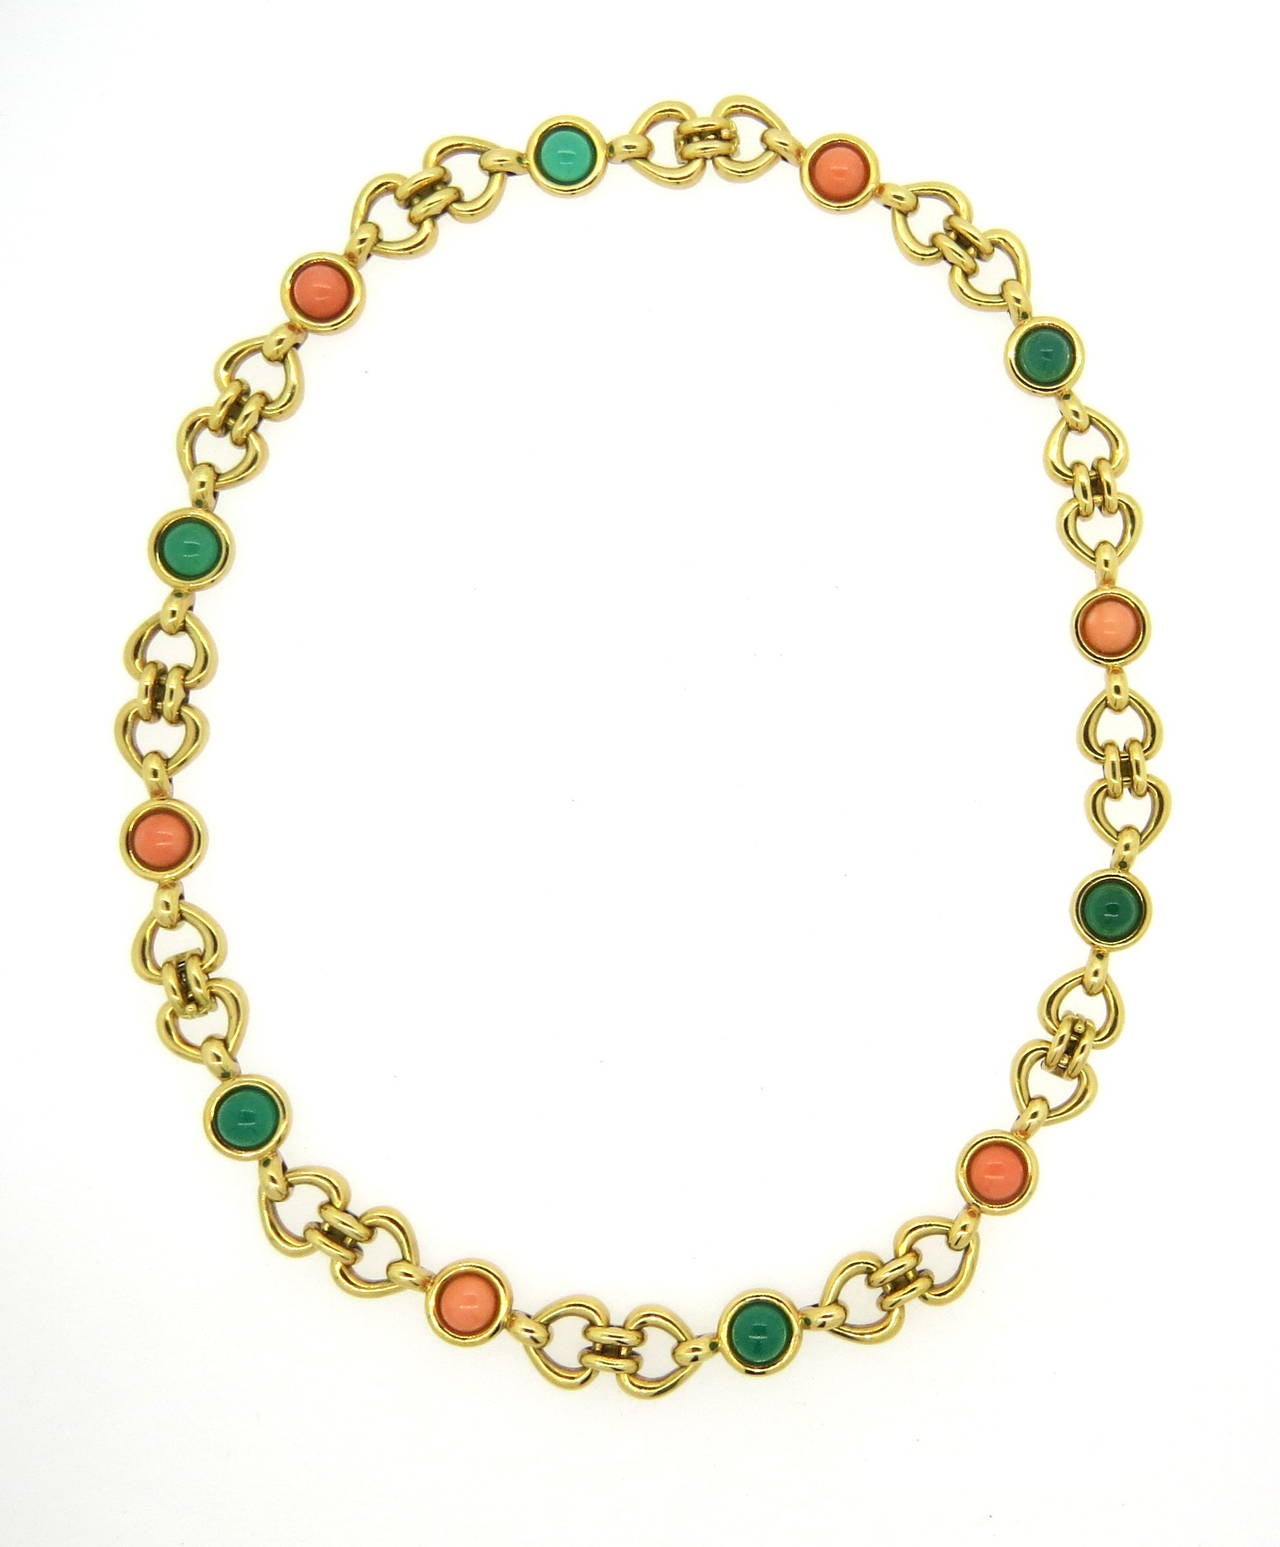 An 18k yellow gold necklace which converts into three bracelets.  The piece is set with coral and chrysoprase cabochons 8.5mm - 8.6mm in diameter.  Each bracelet measures 6.75